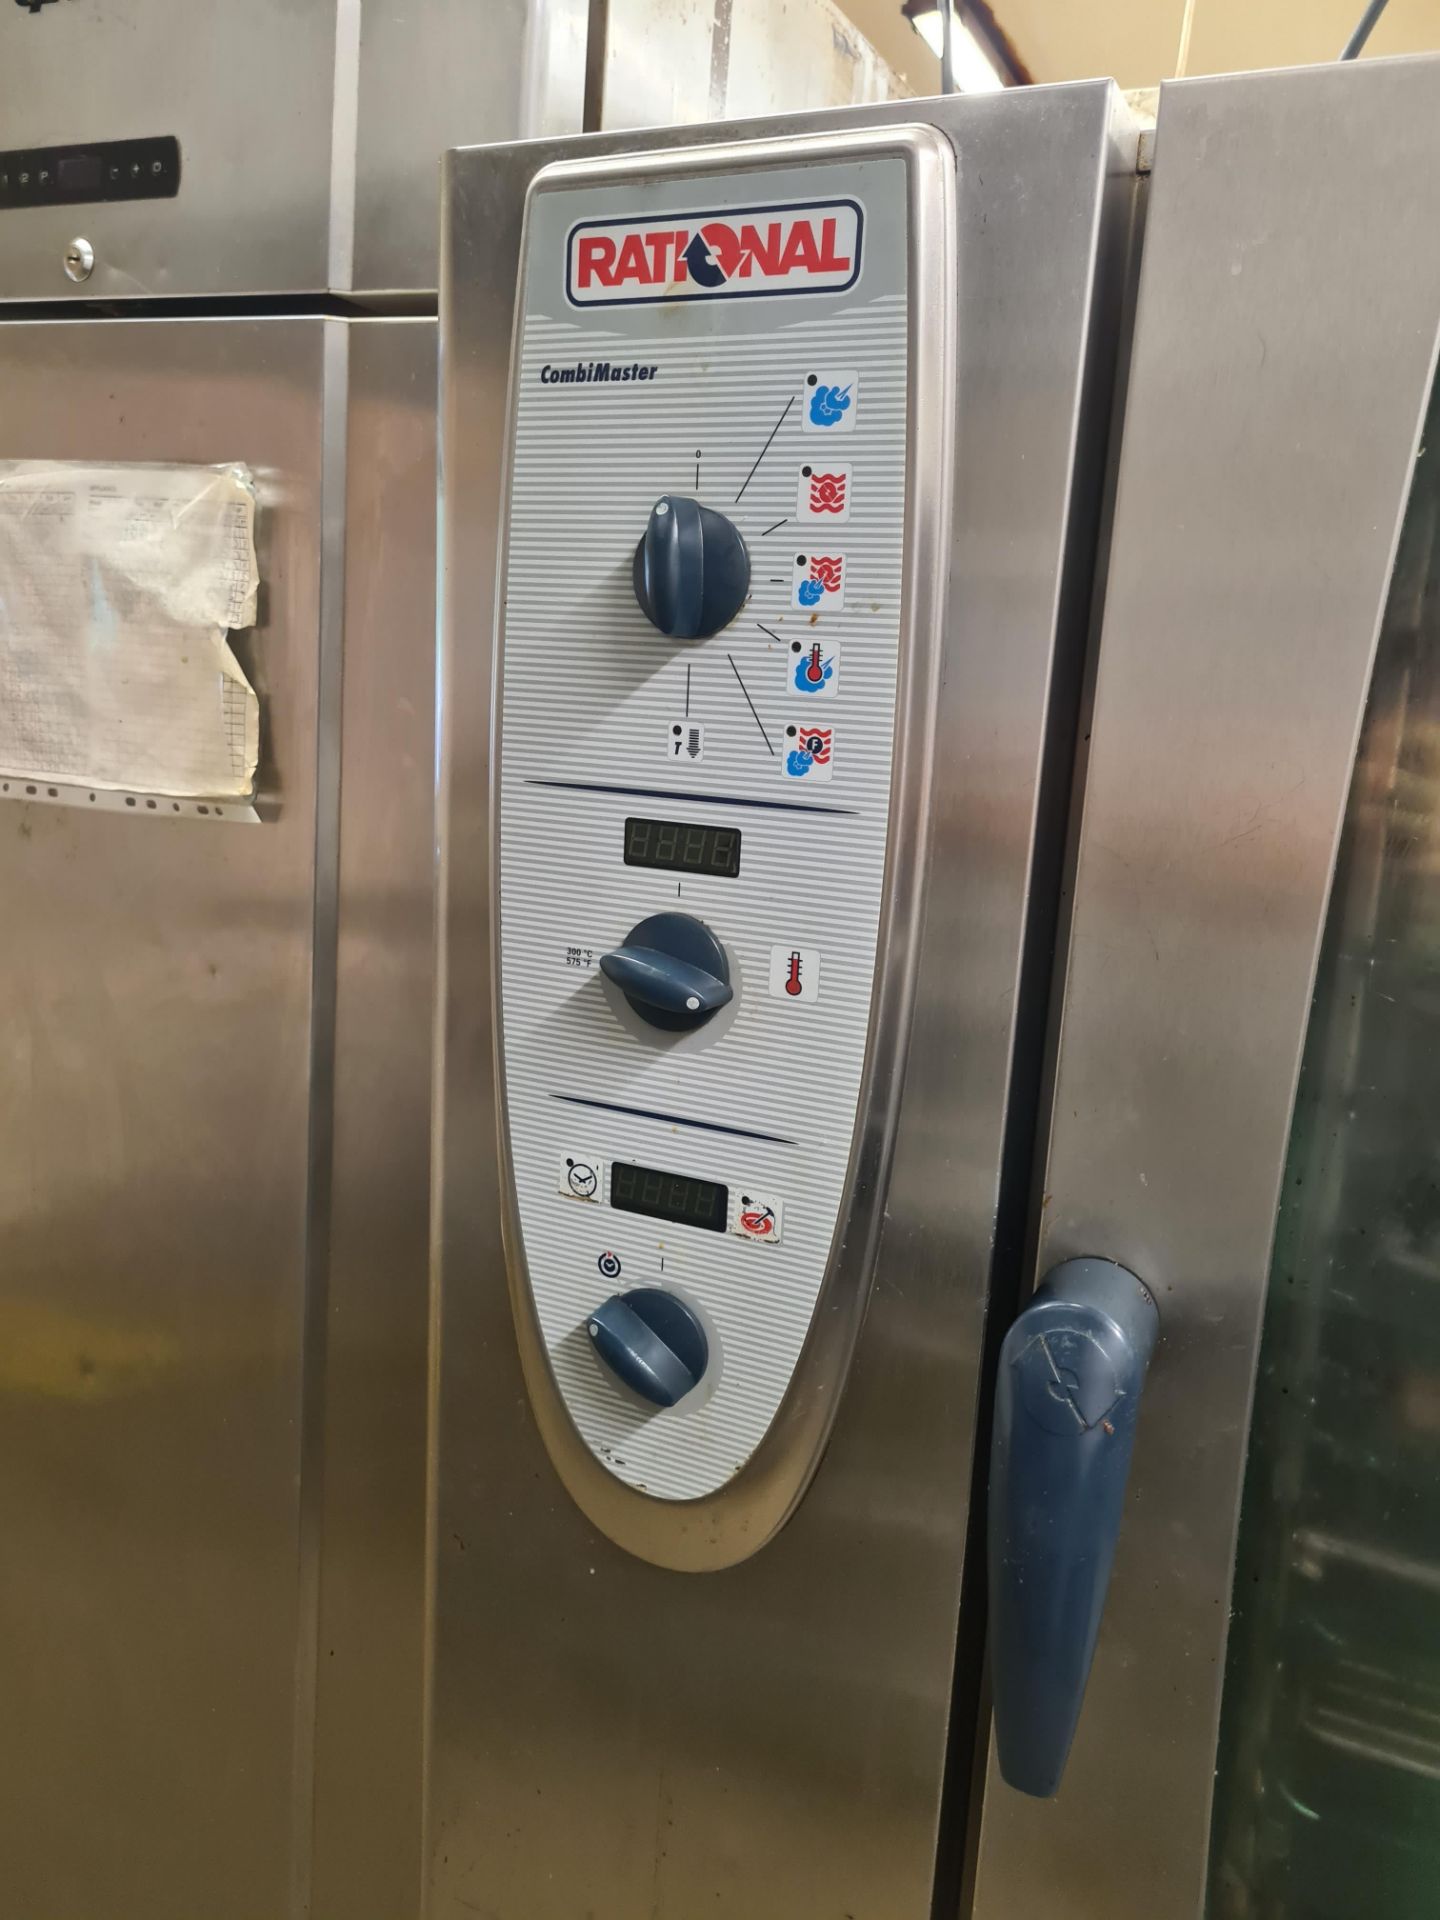 RATIONAL CombiMaster Stainless Steel Combination Oven c/w stand (415v) (Gas Needs Disconnecting - Image 5 of 5